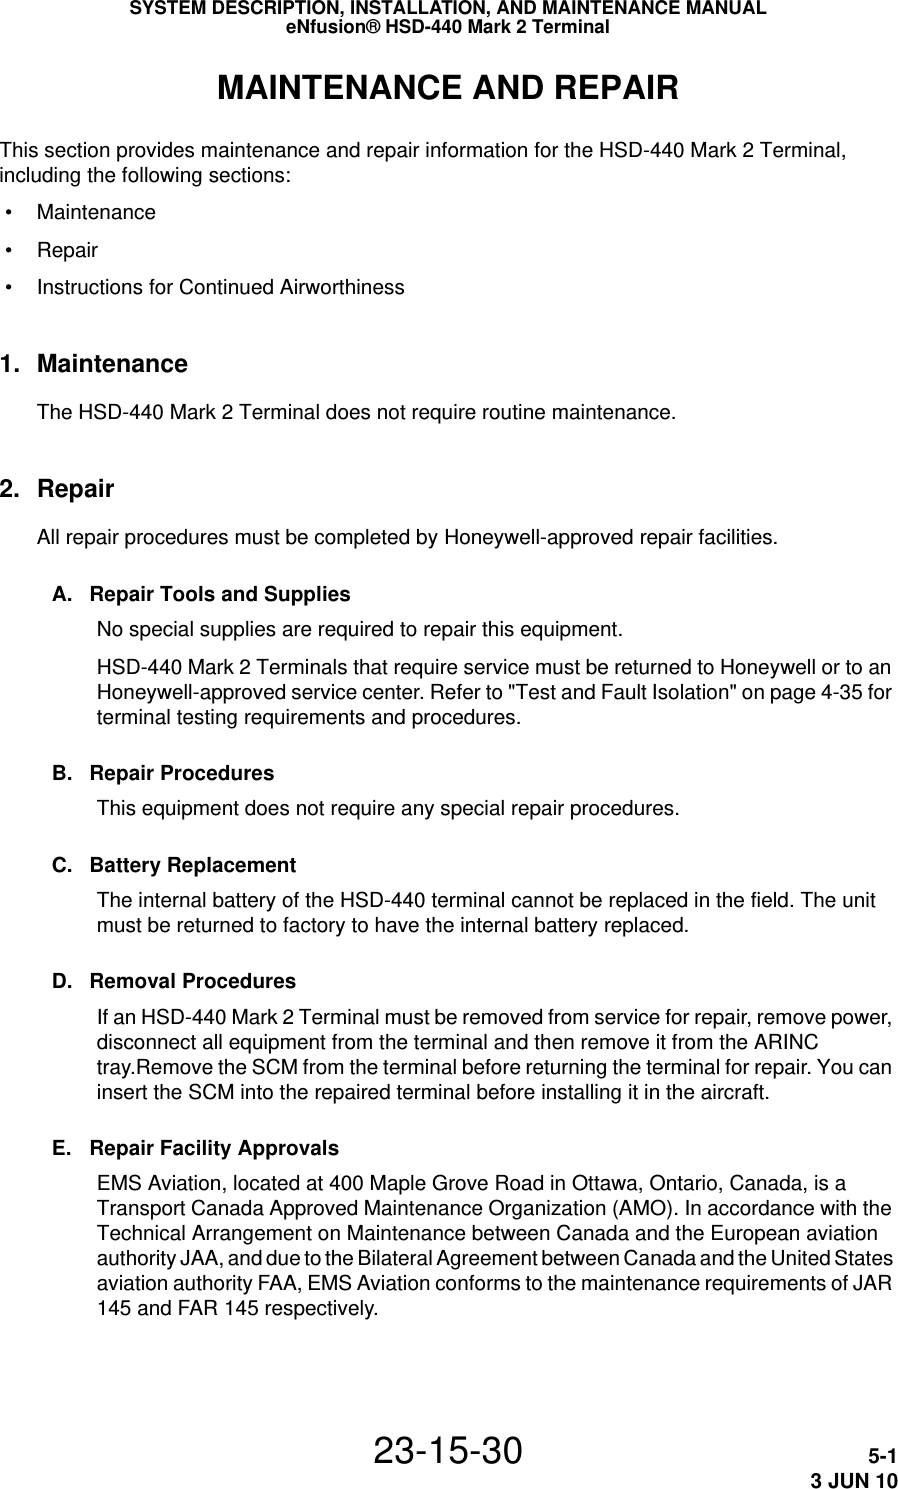 SYSTEM DESCRIPTION, INSTALLATION, AND MAINTENANCE MANUALeNfusion® HSD-440 Mark 2 Terminal23-15-30 5-13 JUN 10MAINTENANCE AND REPAIRThis section provides maintenance and repair information for the HSD-440 Mark 2 Terminal, including the following sections: • Maintenance • Repair • Instructions for Continued Airworthiness1. MaintenanceThe HSD-440 Mark 2 Terminal does not require routine maintenance.2. RepairAll repair procedures must be completed by Honeywell-approved repair facilities.A. Repair Tools and SuppliesNo special supplies are required to repair this equipment. HSD-440 Mark 2 Terminals that require service must be returned to Honeywell or to an Honeywell-approved service center. Refer to &quot;Test and Fault Isolation&quot; on page 4-35 for terminal testing requirements and procedures.B. Repair ProceduresThis equipment does not require any special repair procedures.C. Battery ReplacementThe internal battery of the HSD-440 terminal cannot be replaced in the field. The unit must be returned to factory to have the internal battery replaced.D. Removal ProceduresIf an HSD-440 Mark 2 Terminal must be removed from service for repair, remove power, disconnect all equipment from the terminal and then remove it from the ARINC tray.Remove the SCM from the terminal before returning the terminal for repair. You can insert the SCM into the repaired terminal before installing it in the aircraft.E. Repair Facility ApprovalsEMS Aviation, located at 400 Maple Grove Road in Ottawa, Ontario, Canada, is a Transport Canada Approved Maintenance Organization (AMO). In accordance with the Technical Arrangement on Maintenance between Canada and the European aviation authority JAA, and due to the Bilateral Agreement between Canada and the United States aviation authority FAA, EMS Aviation conforms to the maintenance requirements of JAR 145 and FAR 145 respectively.